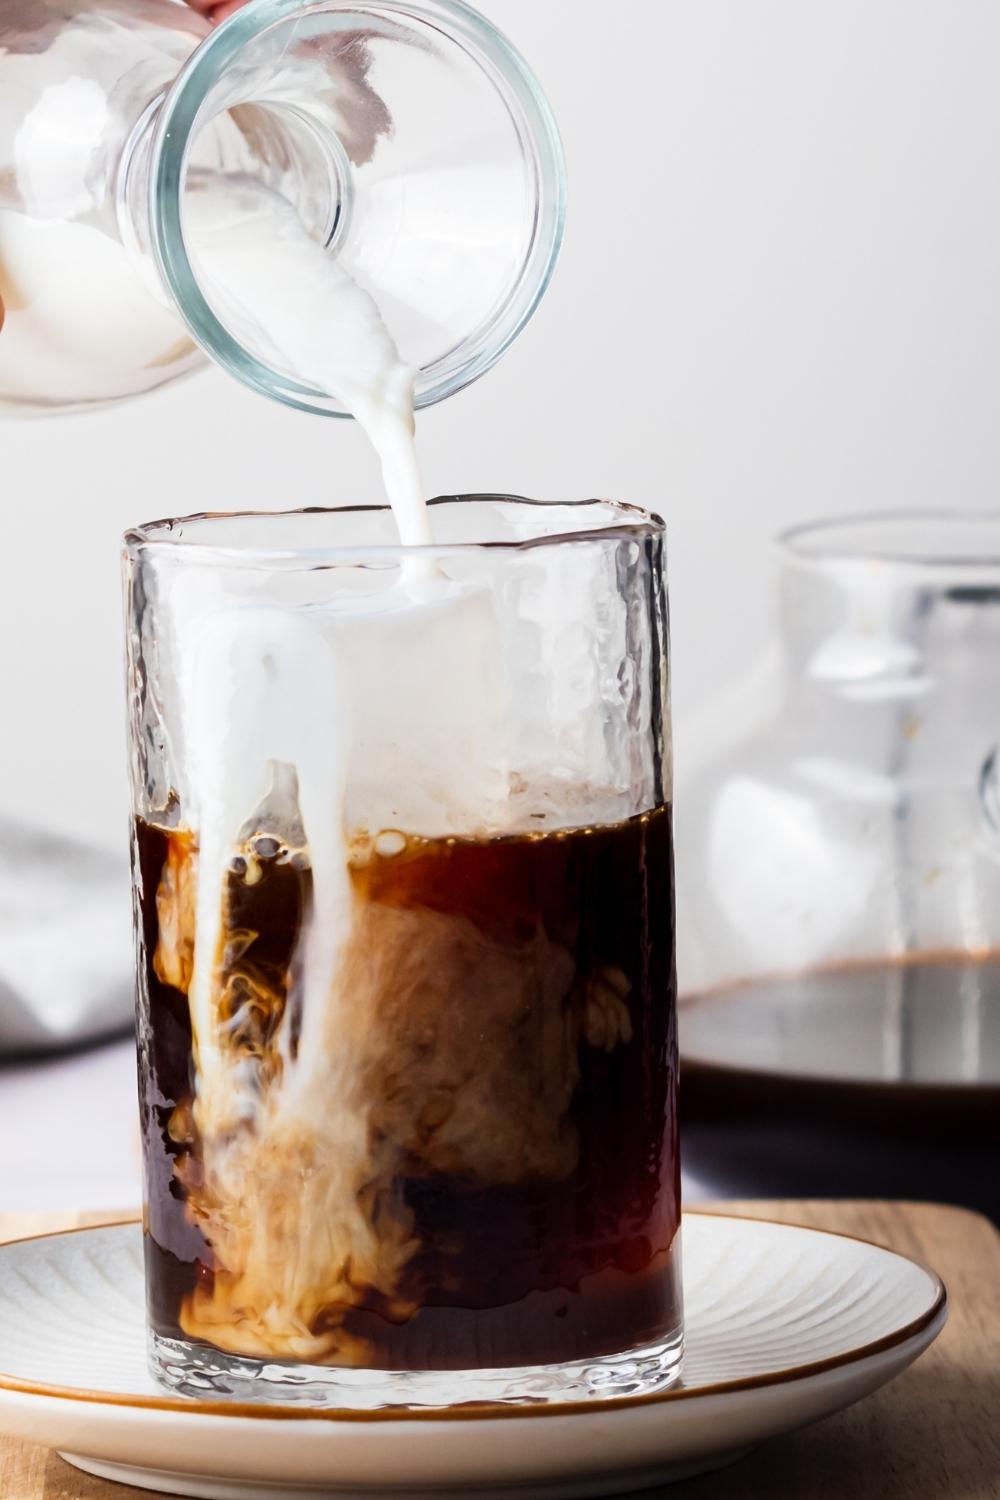 A glass containing homemade McDonald's iced coffee, a pitcher of half and half is being poured into it.